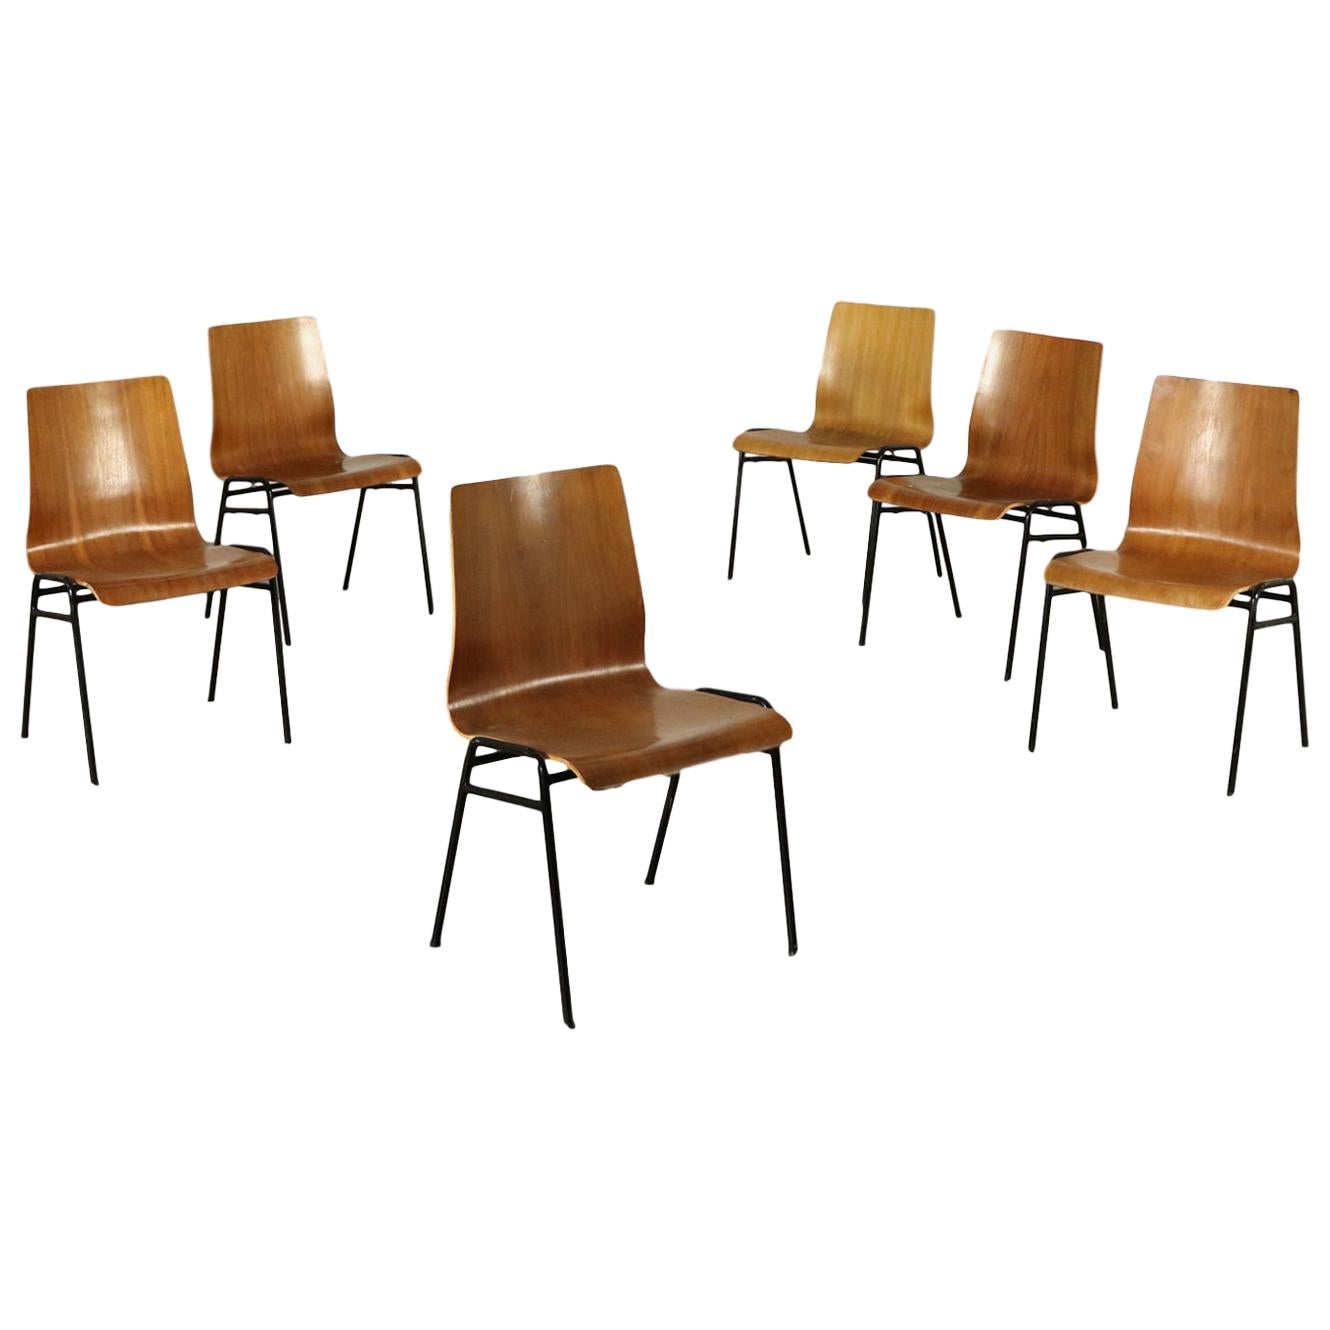 Group of Six Chairs Plywood Metal, Italy, 1960s-1970s